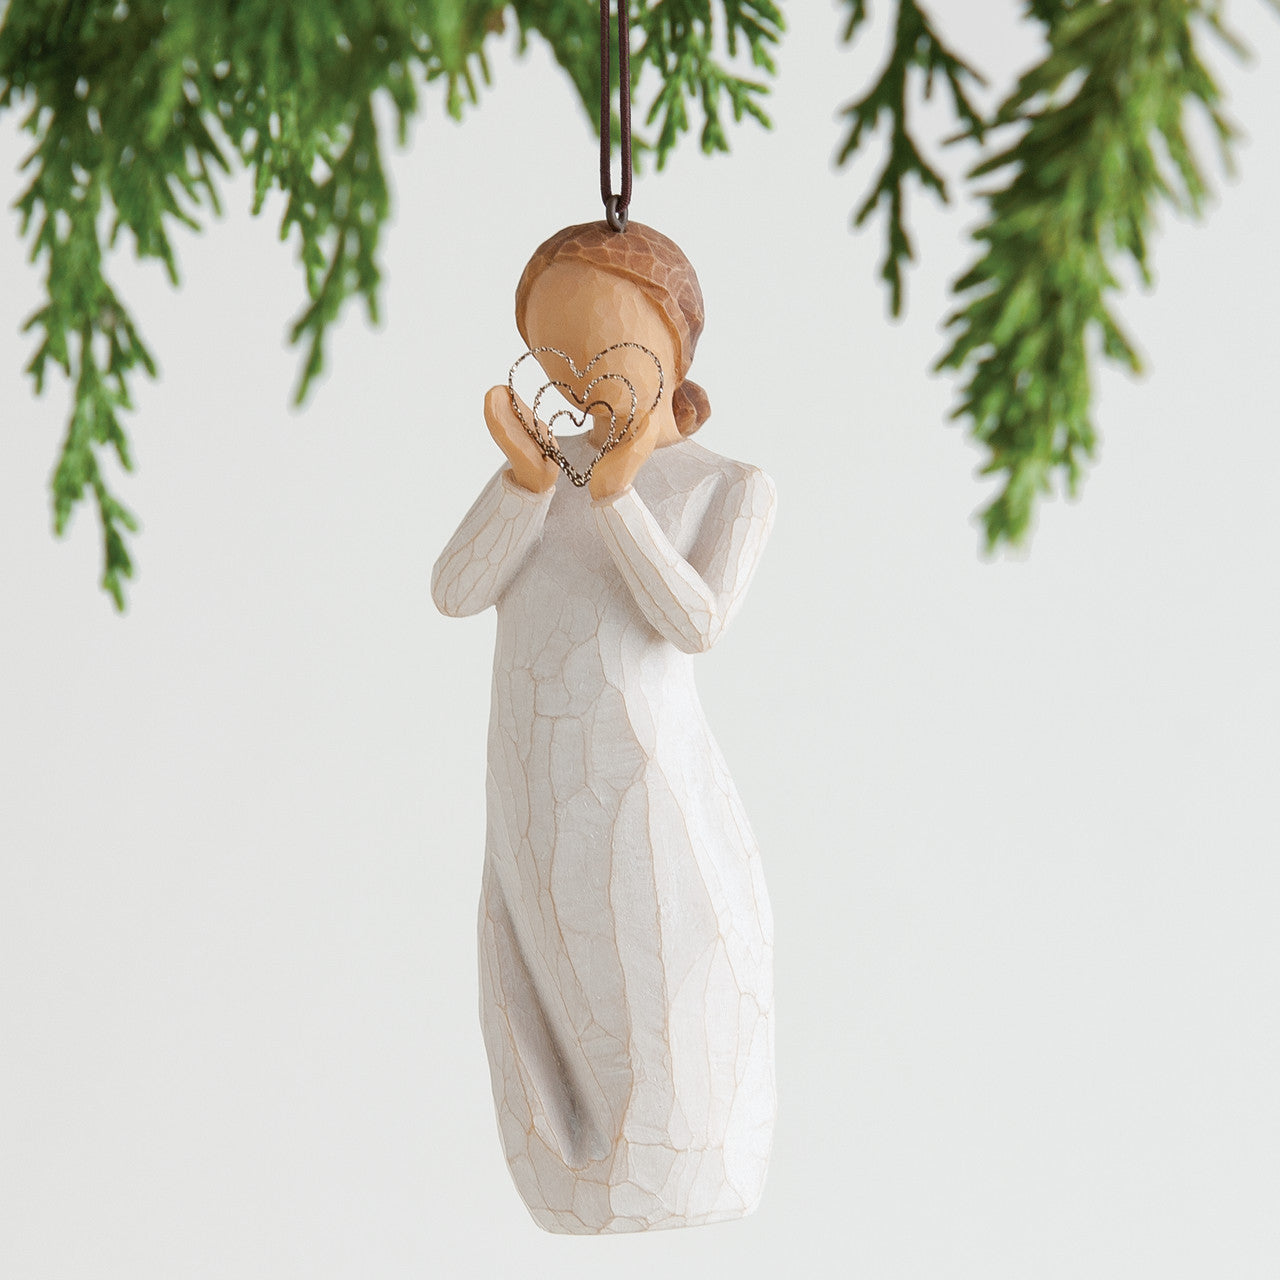 Willow Tree "Lots of Love" hanging  Ornament